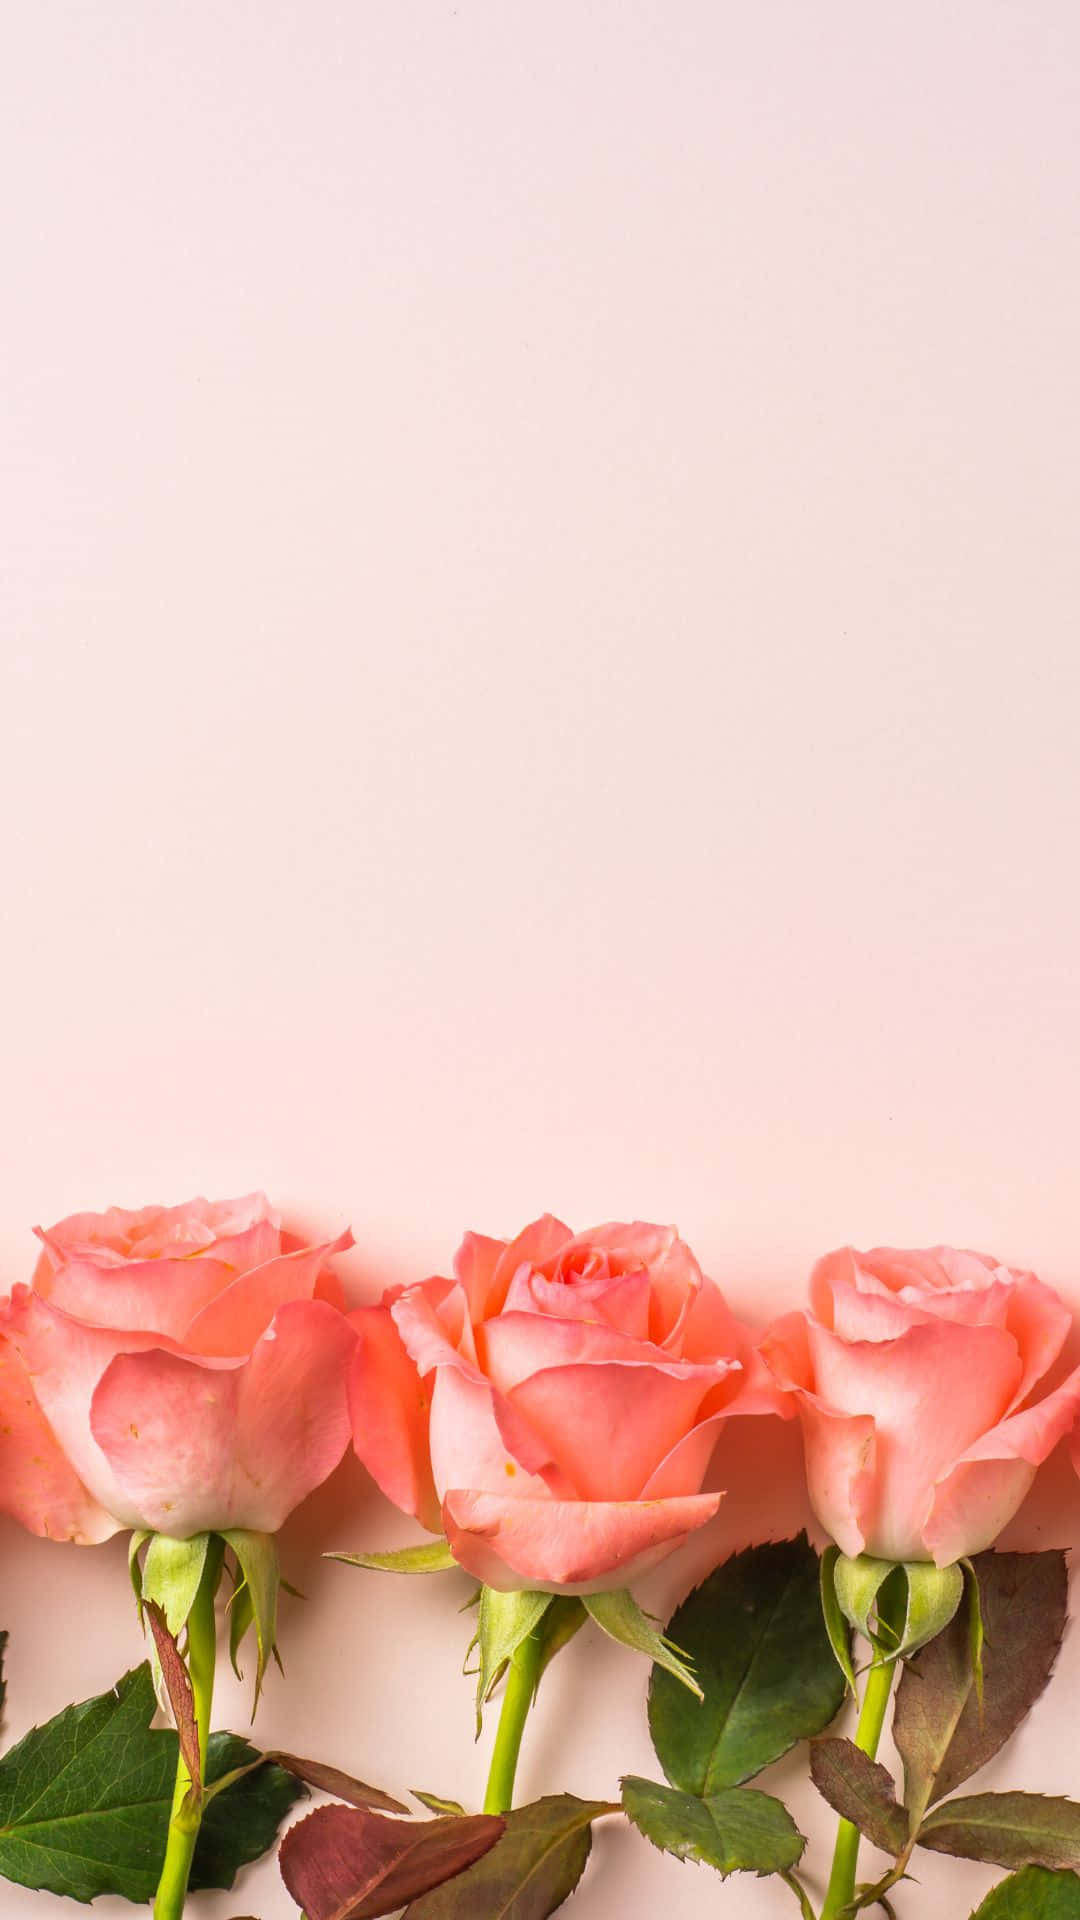 A single pink rose in bloom against a crisp green background Wallpaper